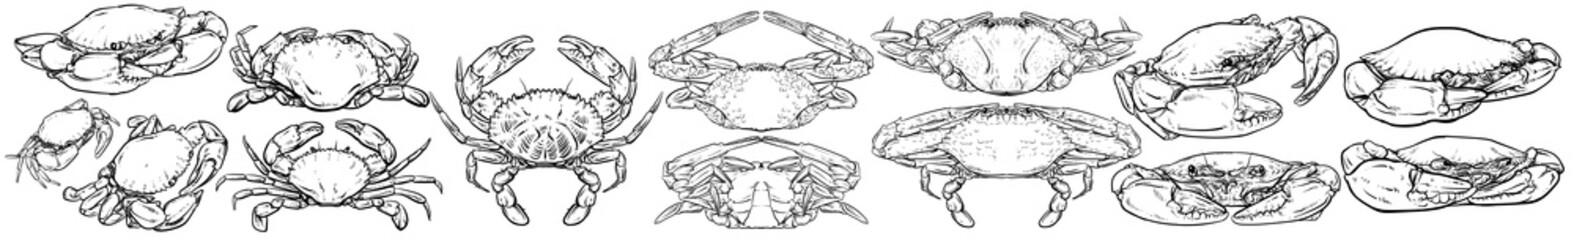 Crab vector set, Hand drawn vector illustration, Collection of realistic sketches various crabs